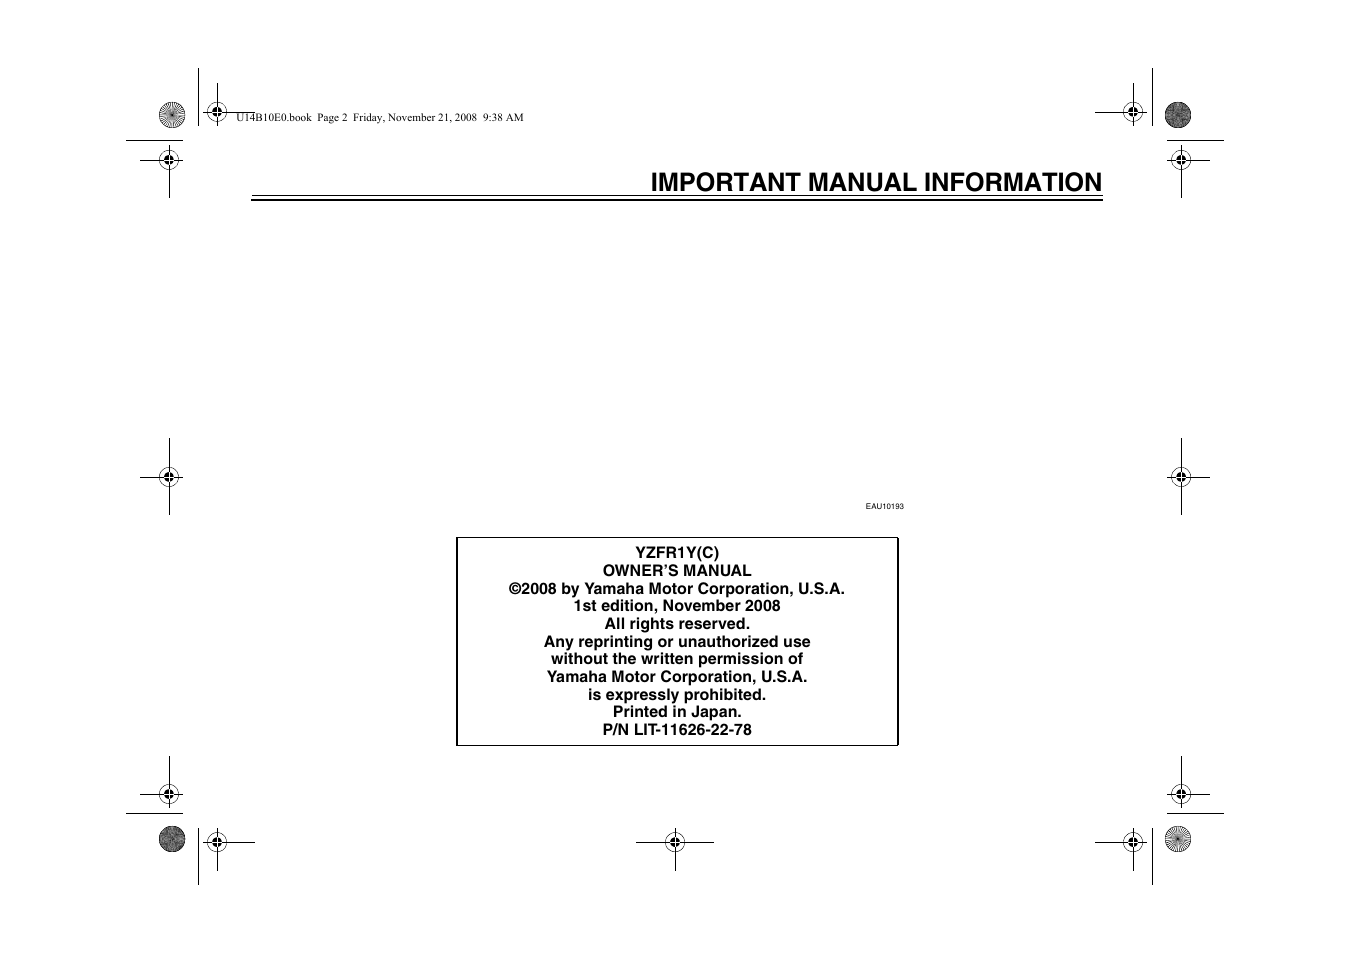 Important manual information | Yamaha YZFR1Y(C) User Manual | Page 5 / 122